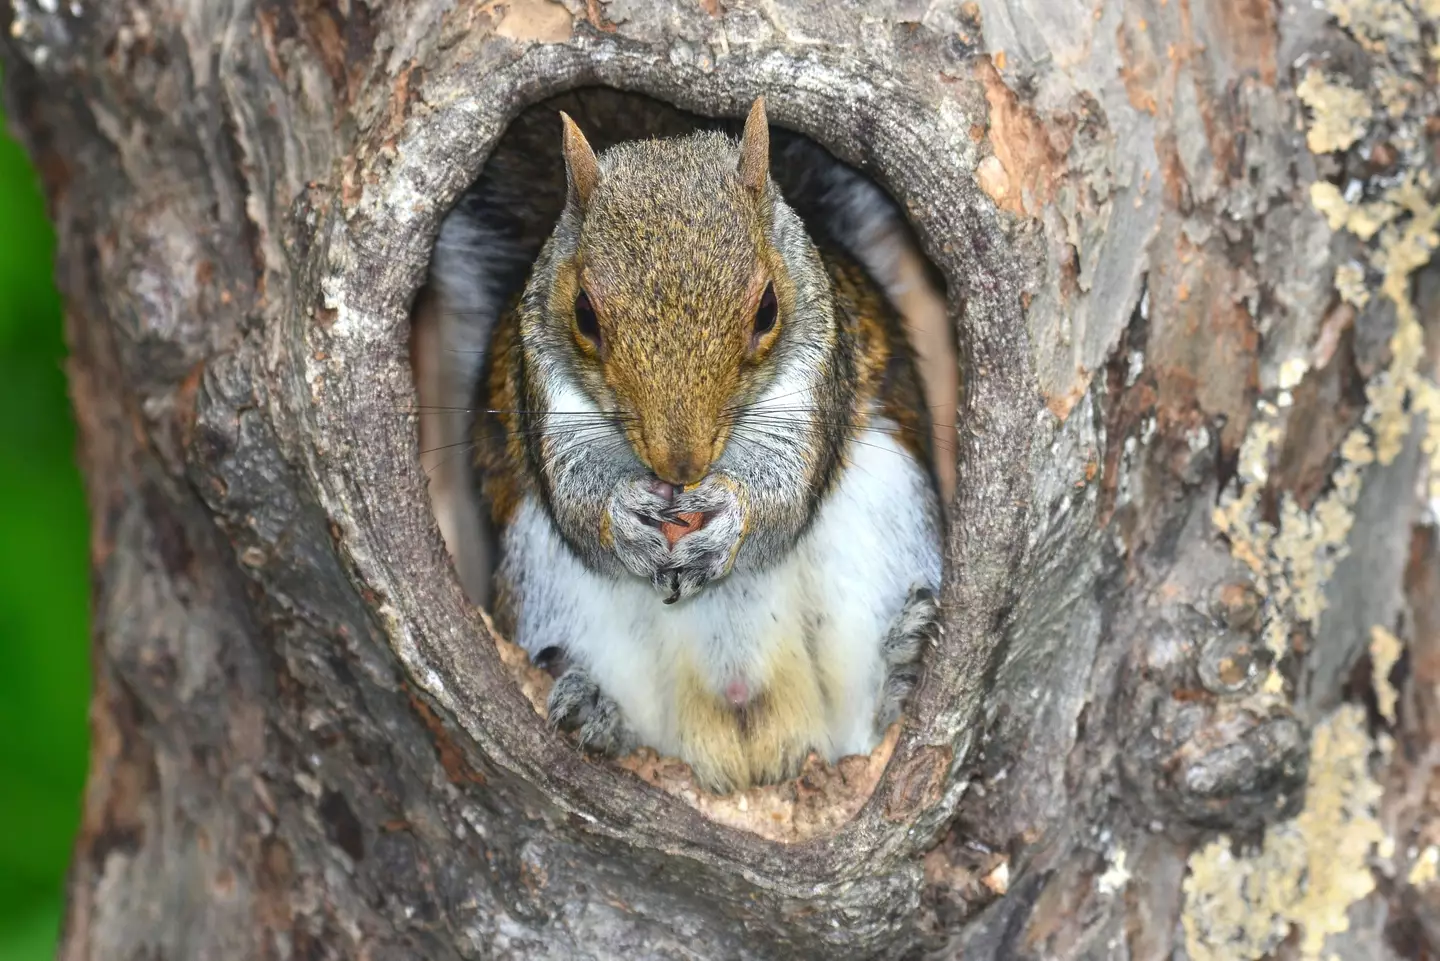 It wasn't this squirrel either, but it does look like it's up to something.